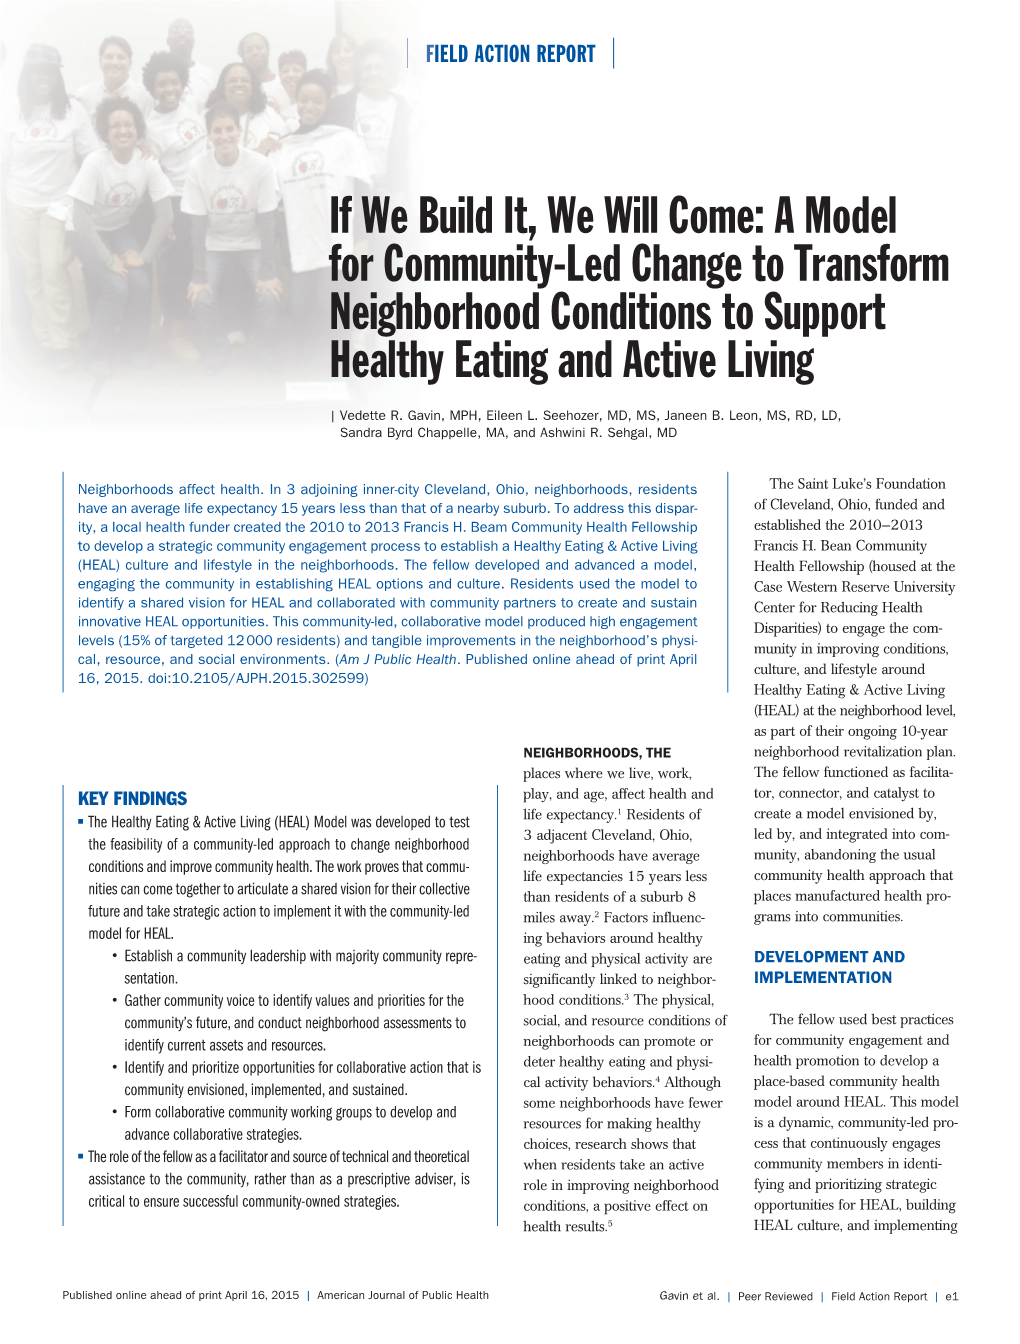 If We Build It, We Will Come: a Model for Community-Led Change to Transform Neighborhood Conditions to Support Healthy Eating and Active Living